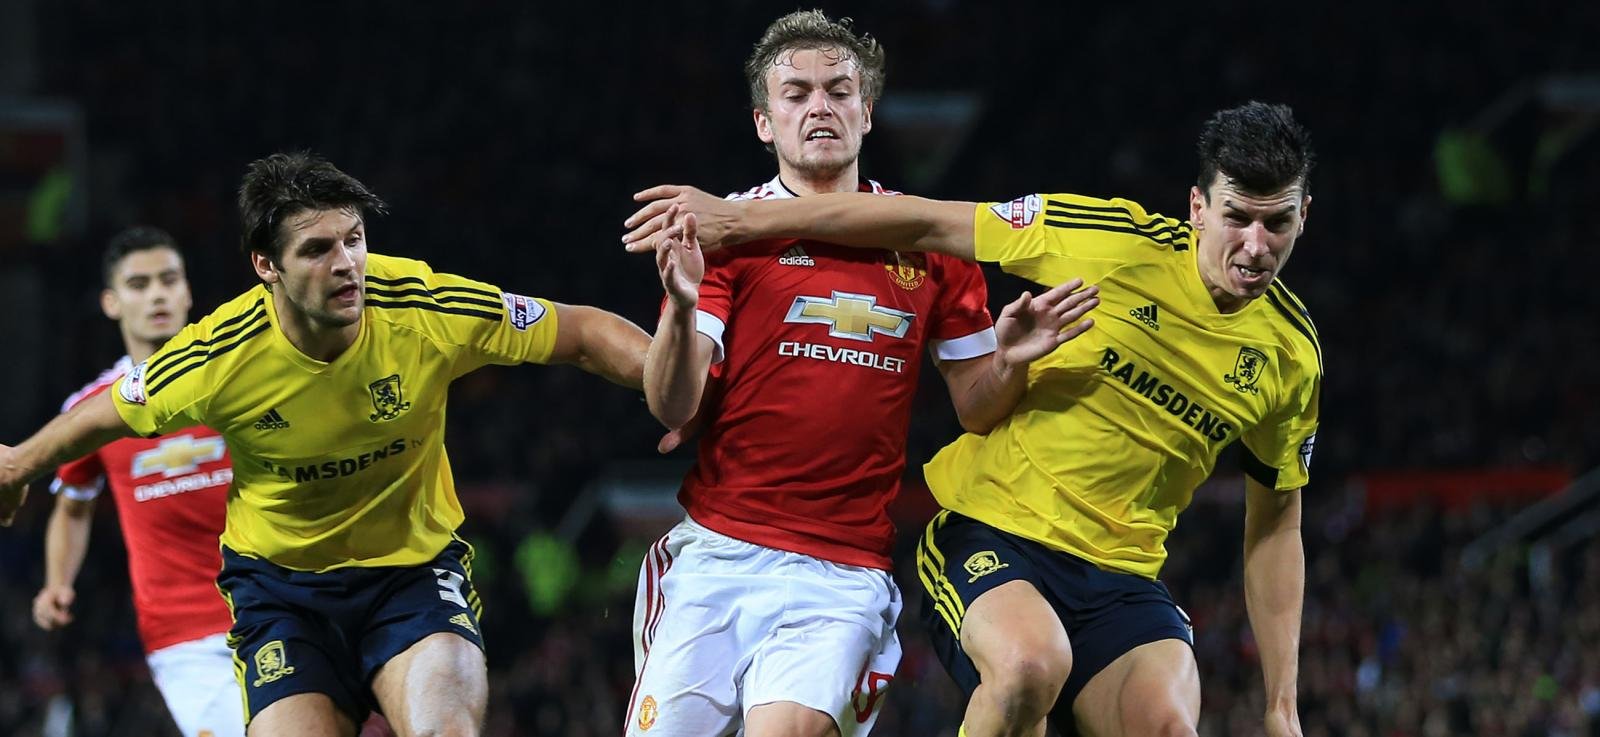 James Wilson: Joining Brighton an “easy decision”